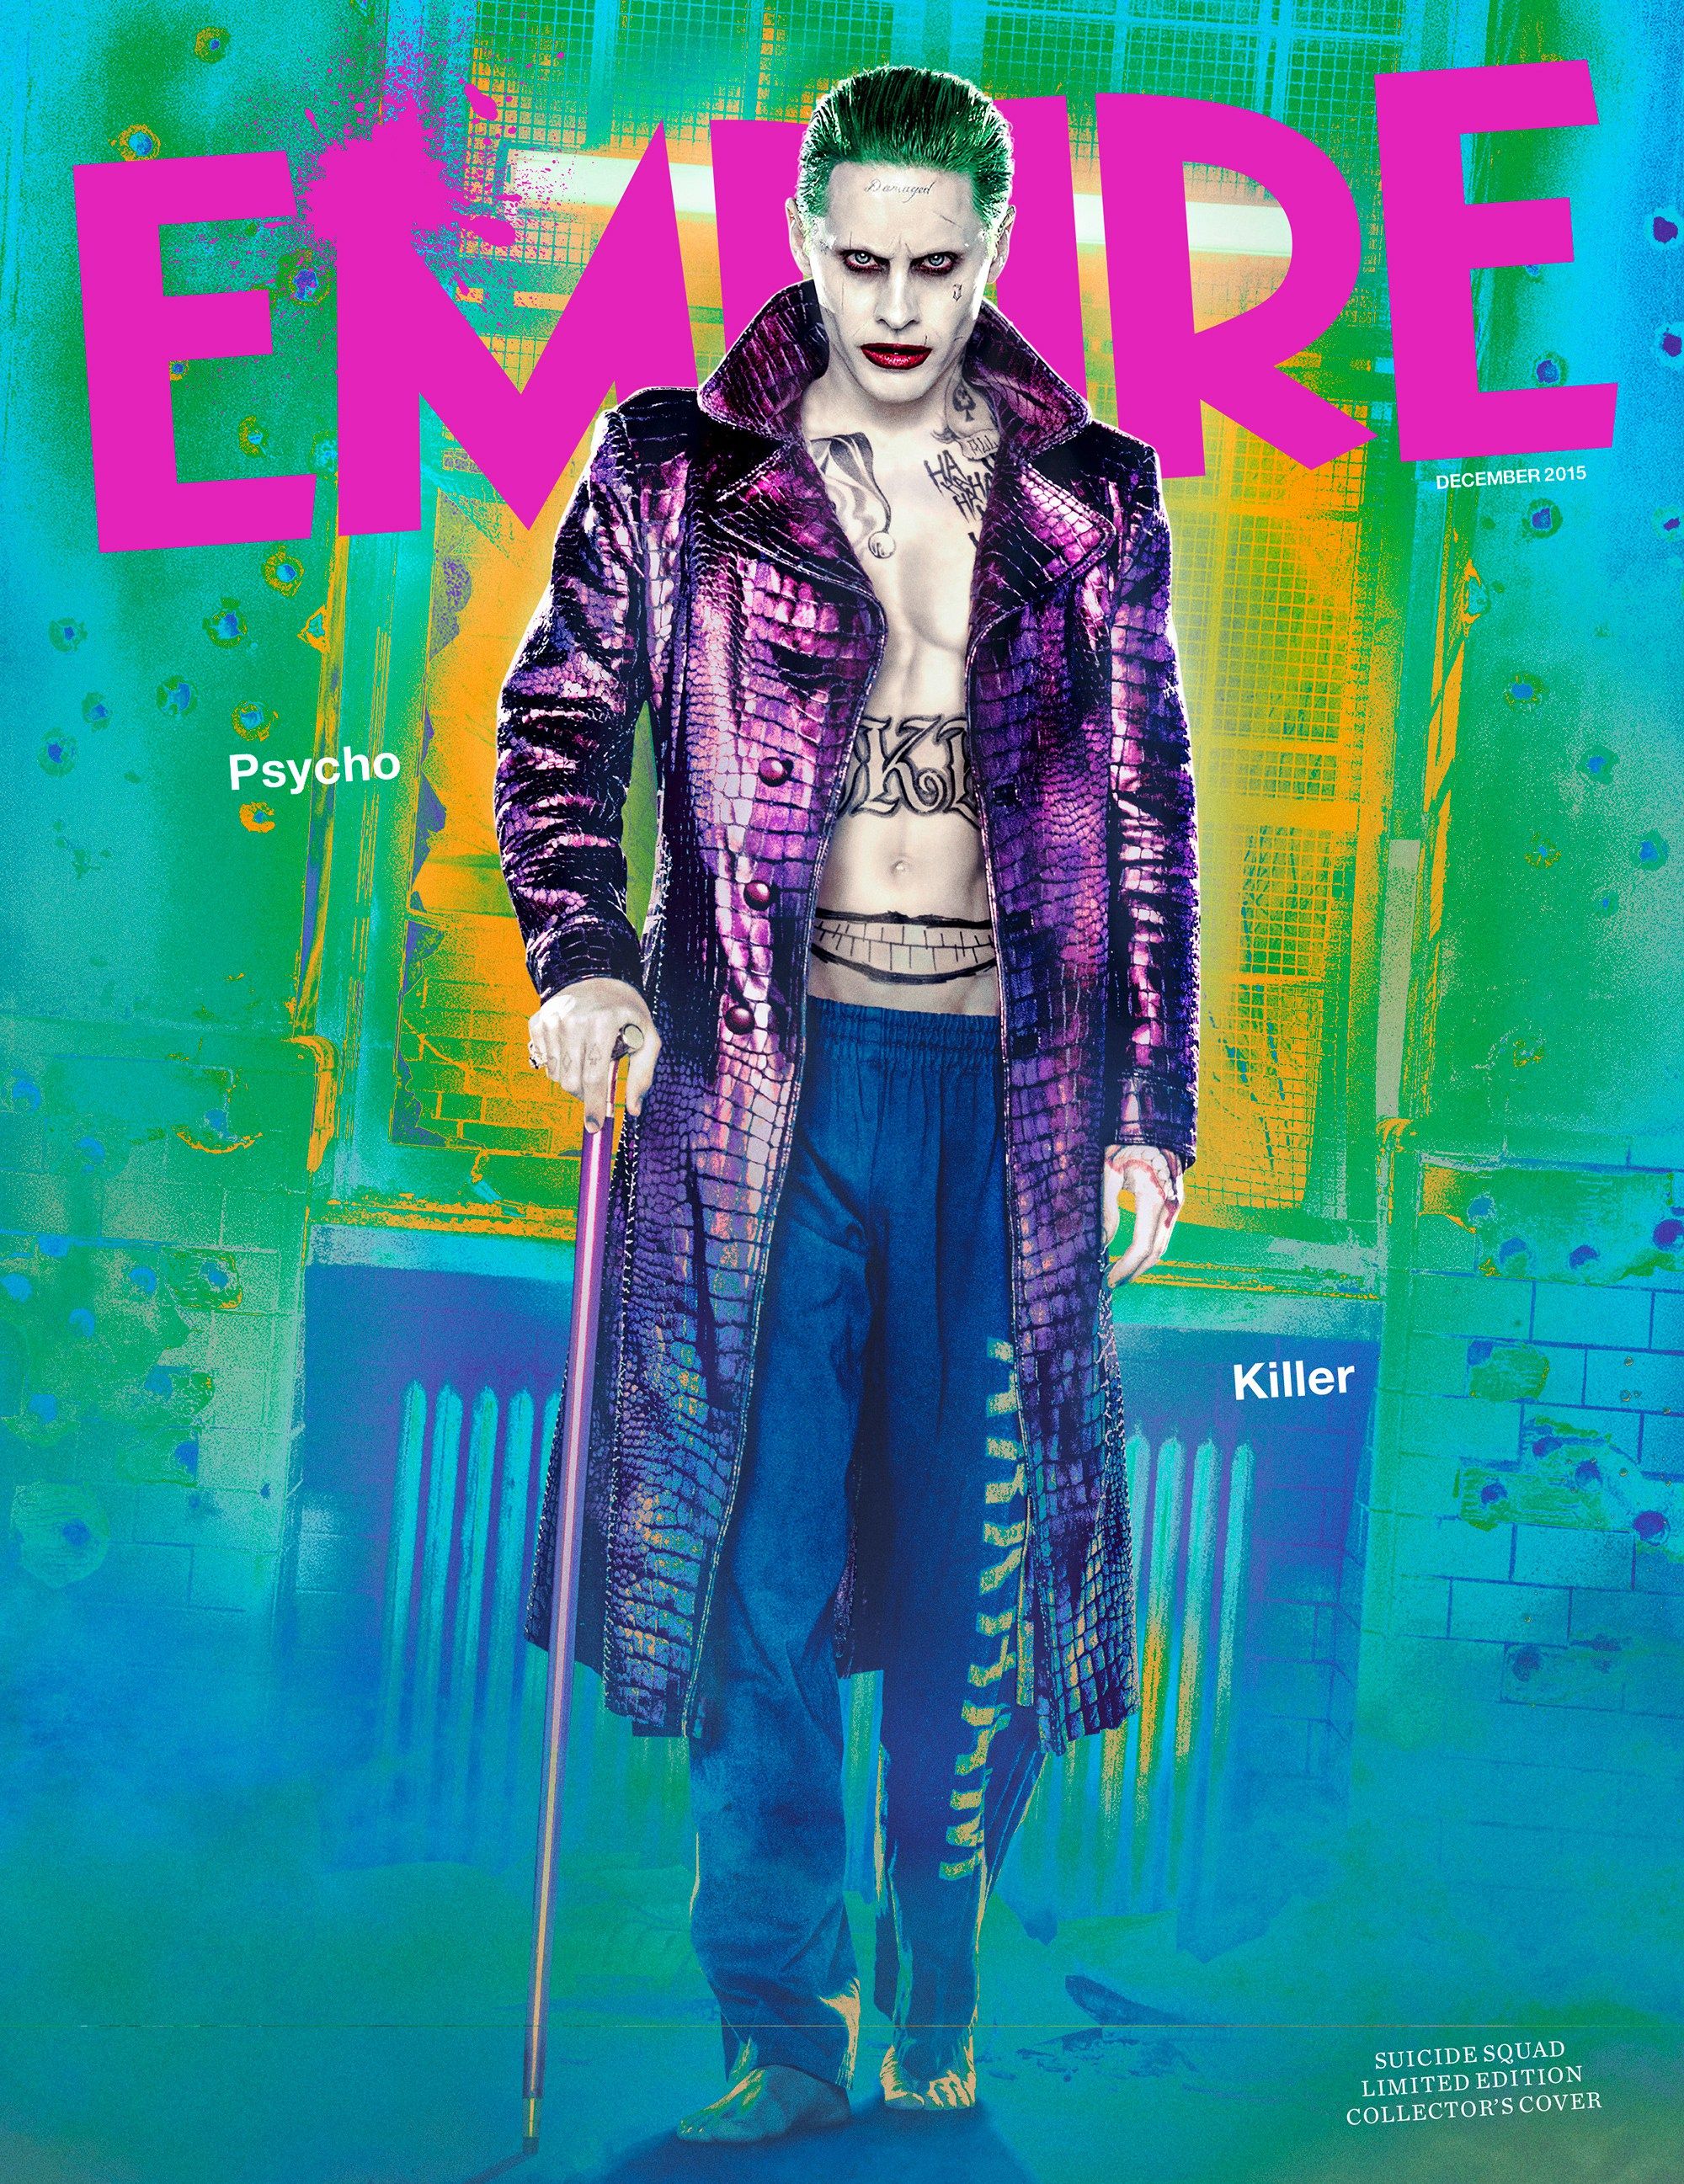 The Joker covers Empire magazine with new 'Suicide Squad' image